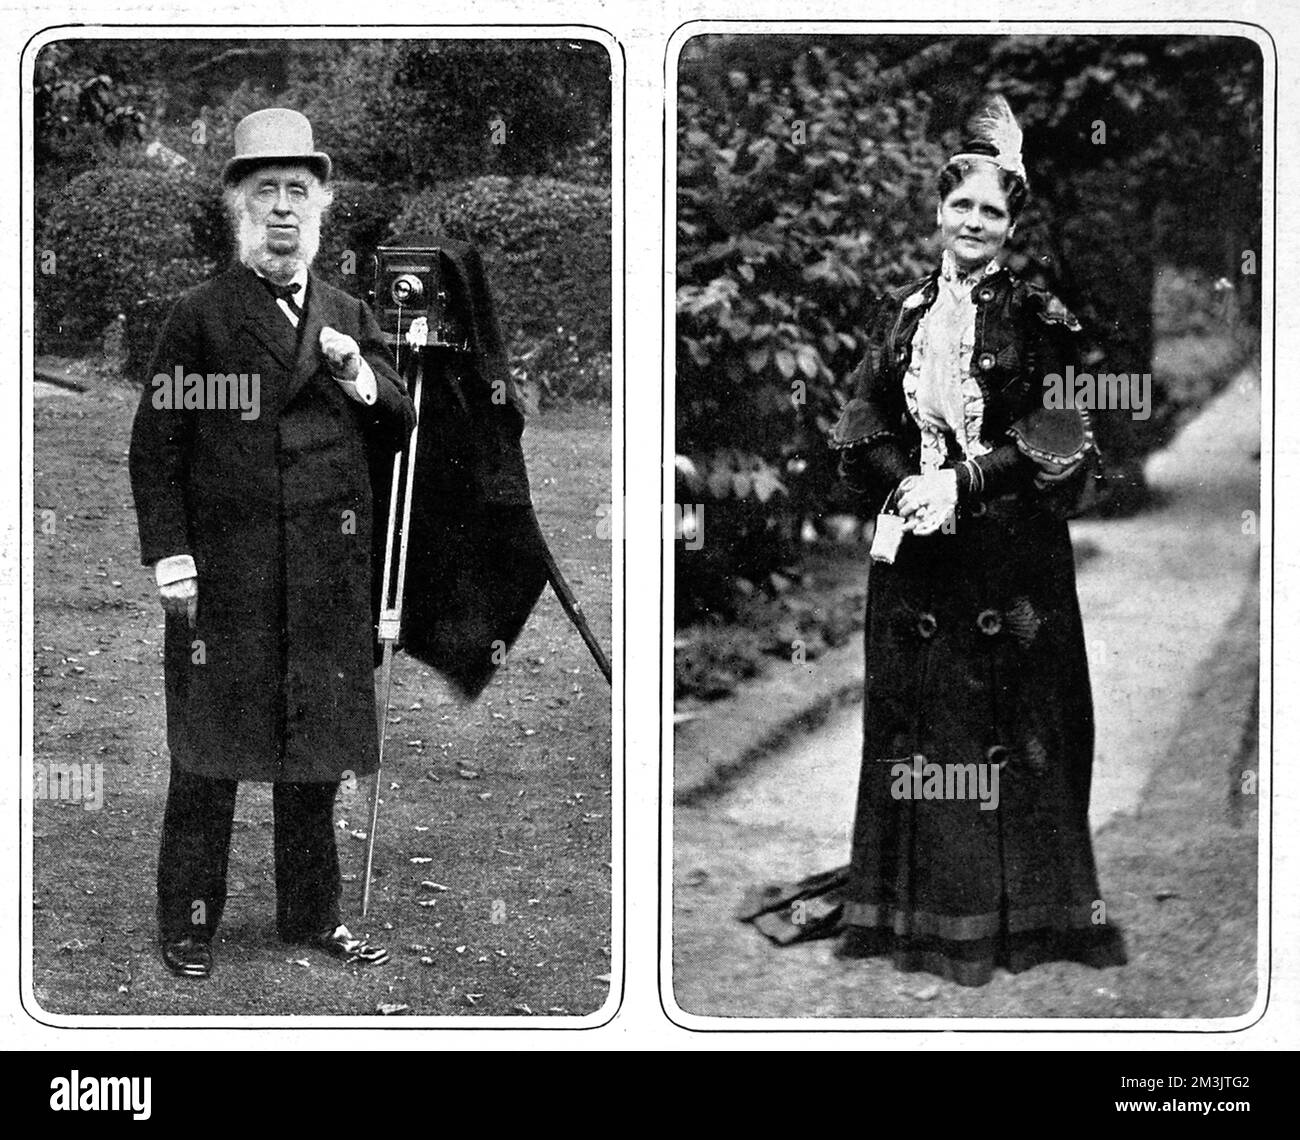 Sir Benjamin and Lady Stone. Benjamin Stone was a Conservative MP for East Birmingham between 1895-1909. He was known for his keen interest in photography and was appointed offical photographer in Westminster Abbey for King George's Coronation. During his years in parliament he became the 'unoffical' House of Commons photographer, producing over his lifetime, 30,000 photographic plates.     Date: 1914 Stock Photo